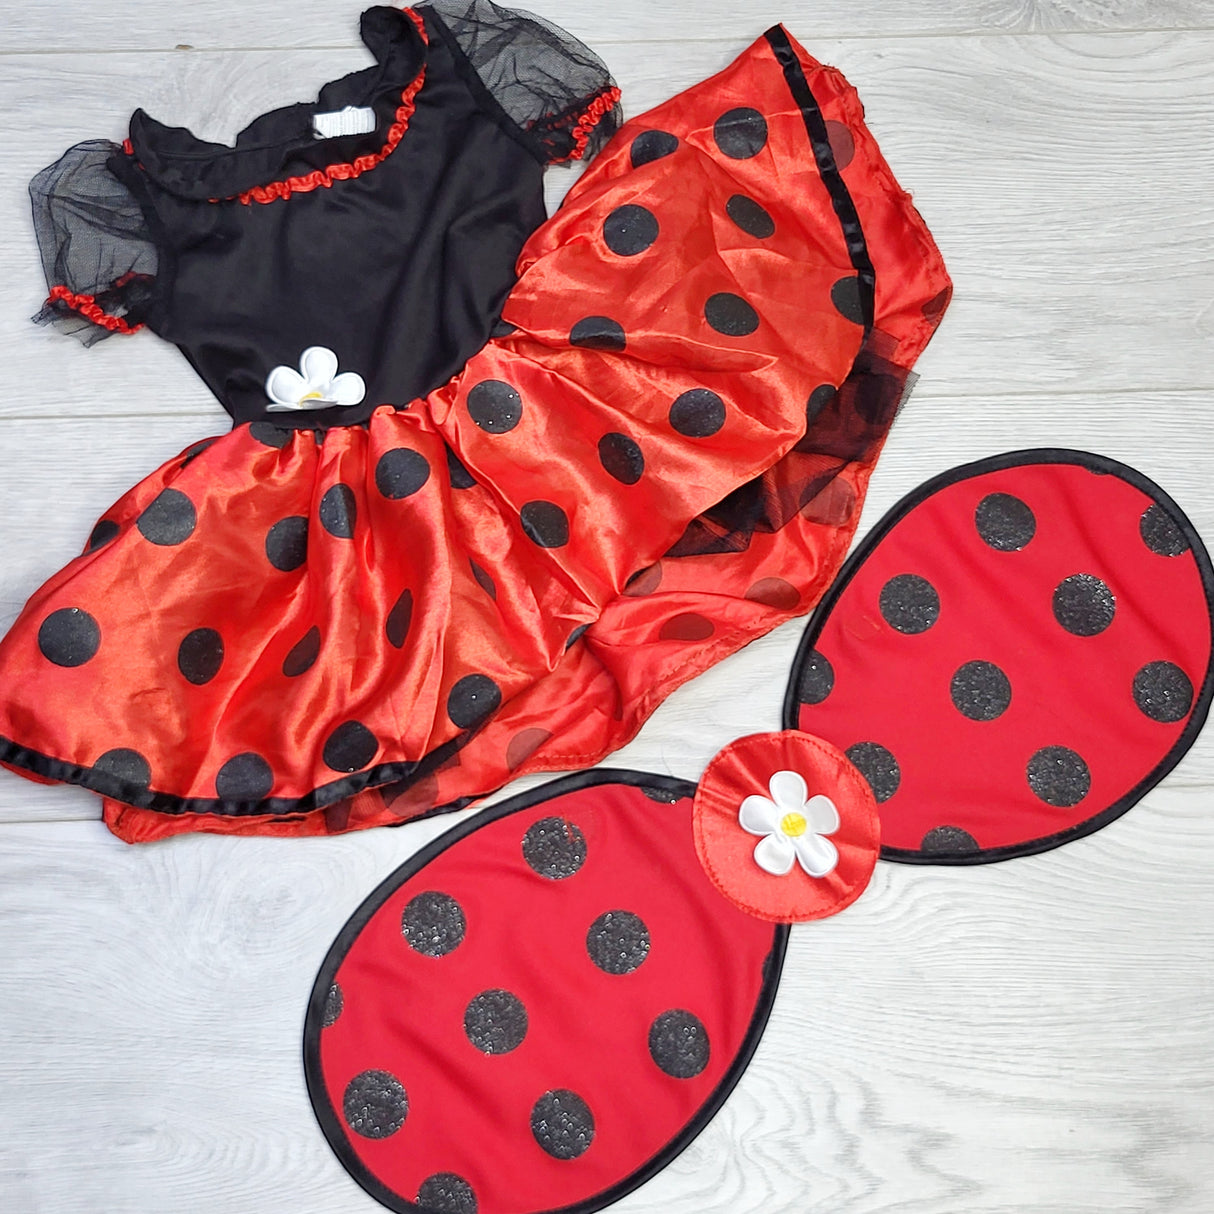 MSNDS2 - Ladybug costume with wings. Size 0-6 months